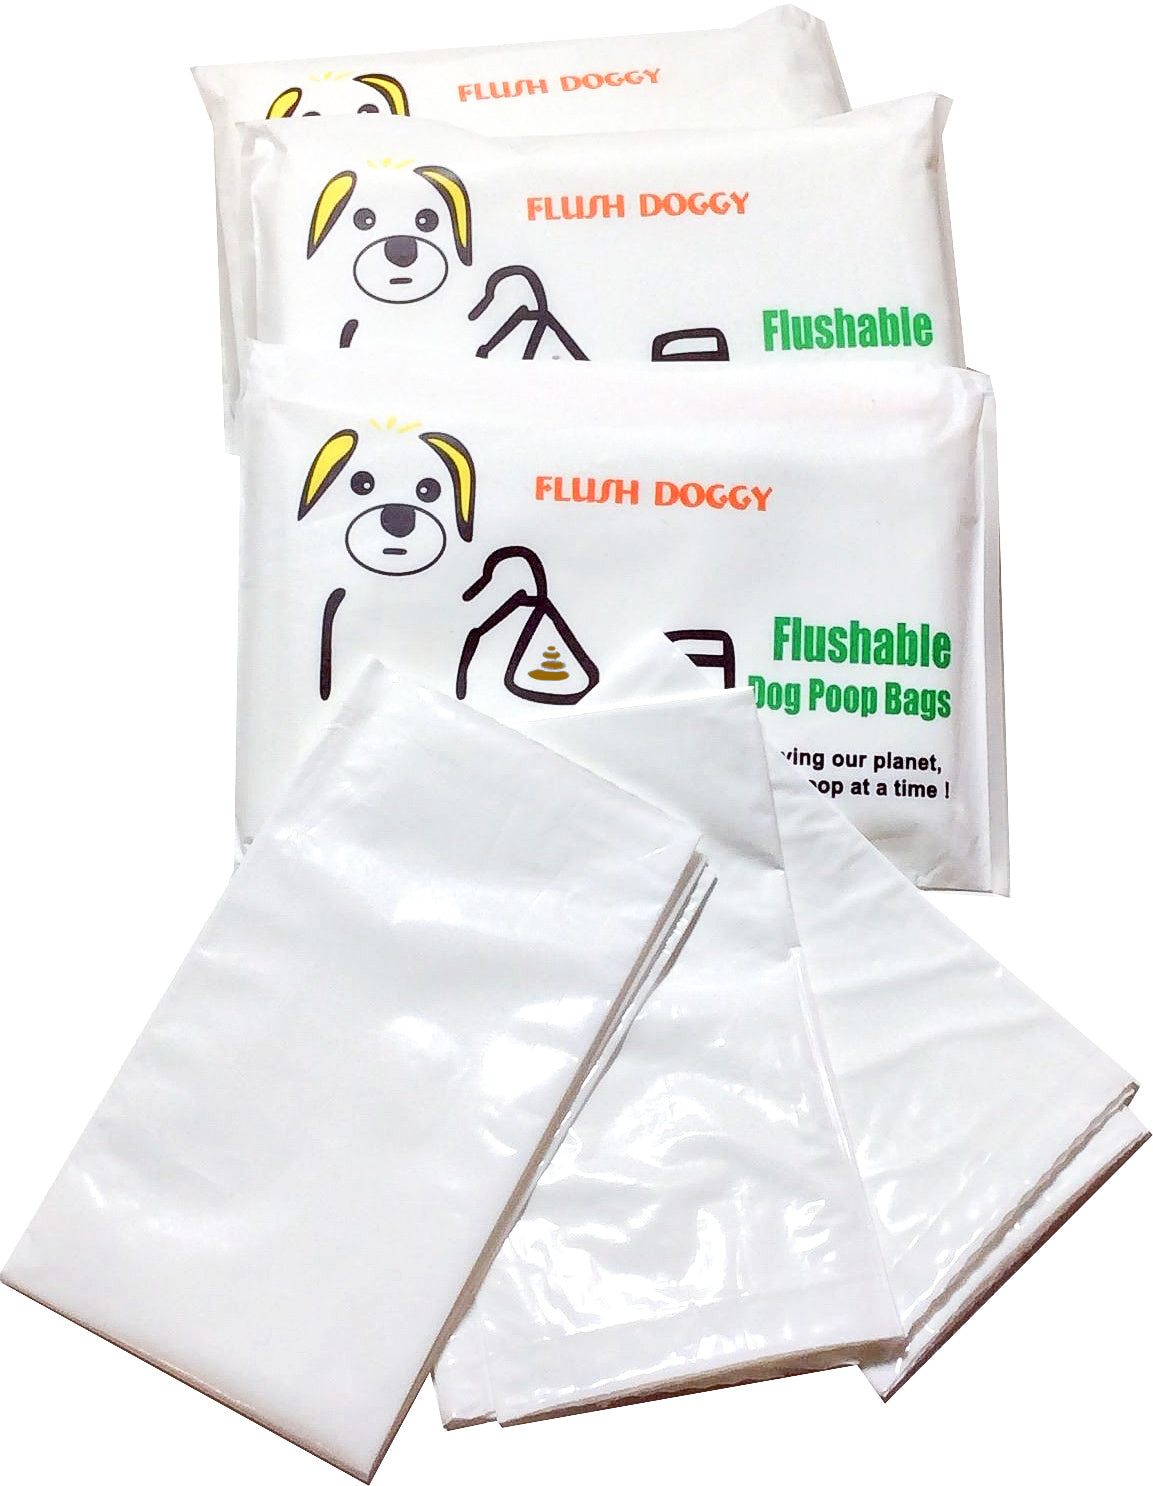 a photo showing Flush Doggy packaging and actual poop bags